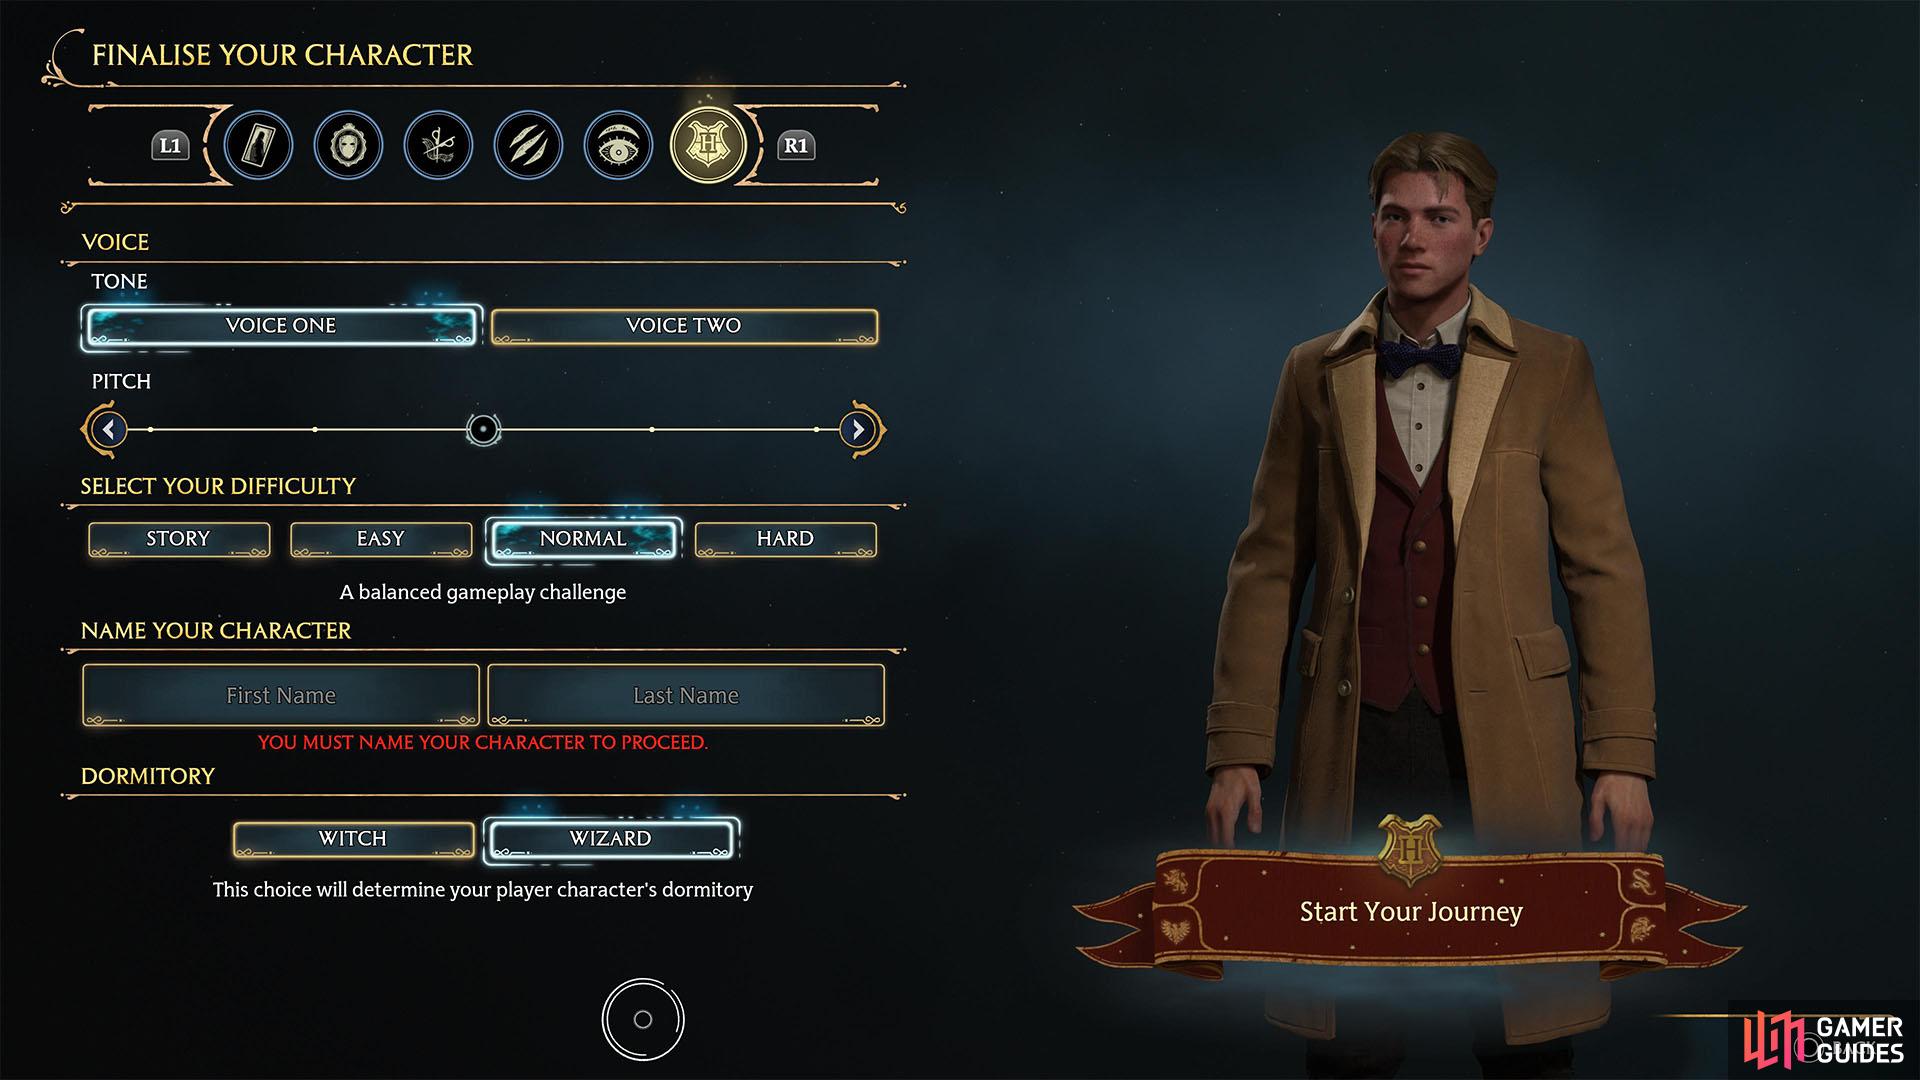 Hogwarts Legacy witch or wizard option